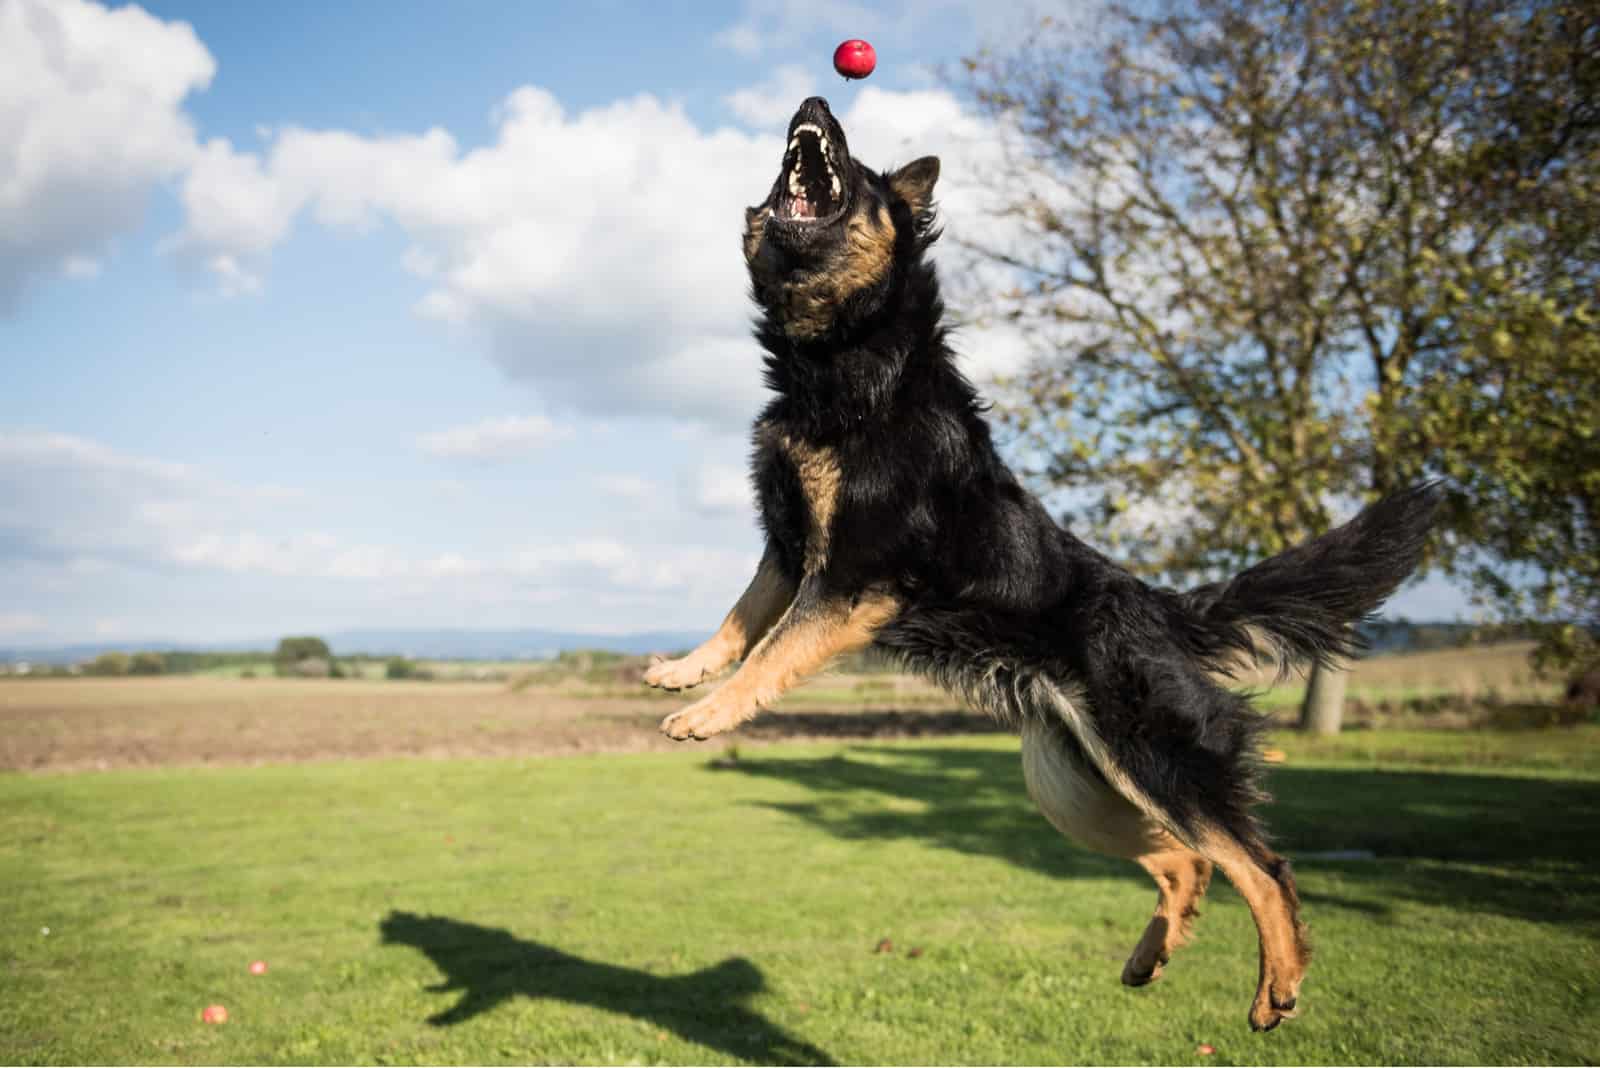 Bohemian Shepherd jumps and catches apples in a garden